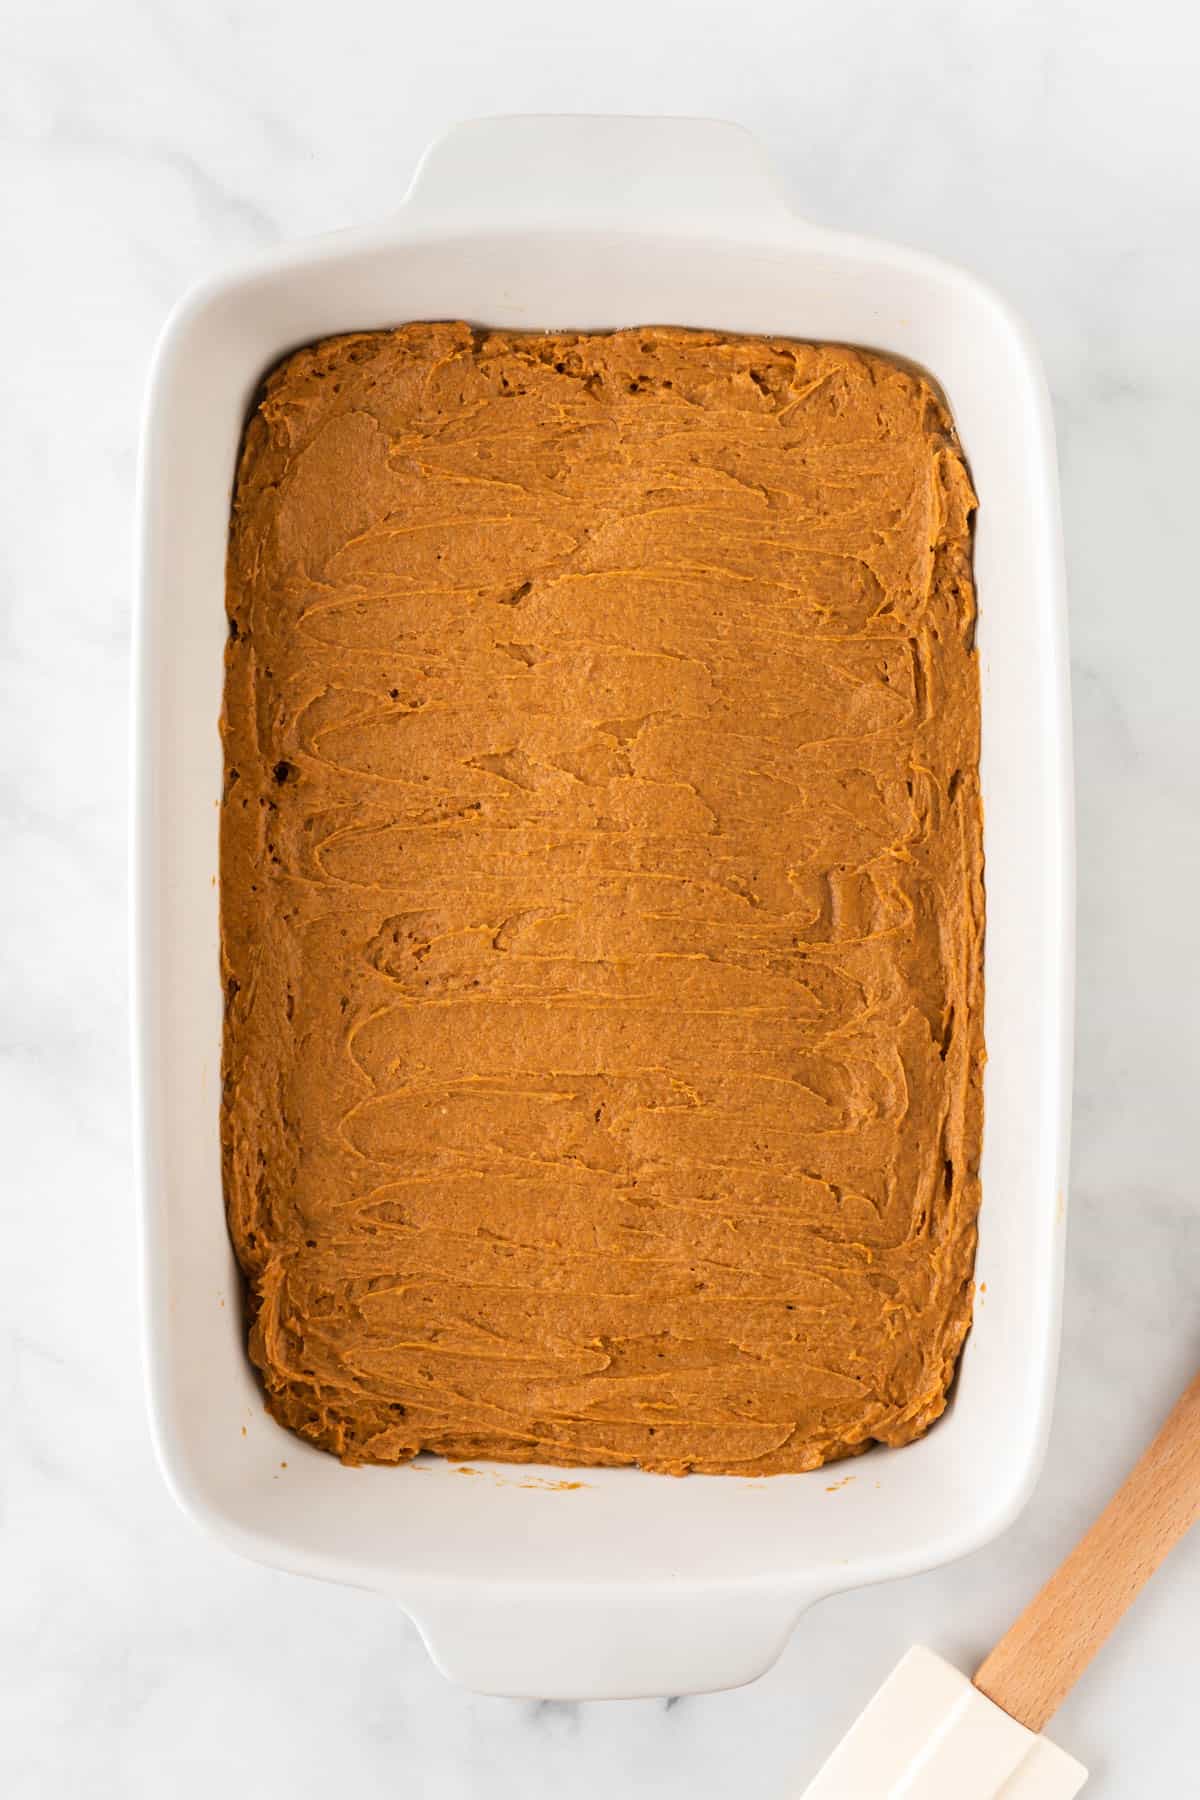 pumpkin batter spread out in a baking dish